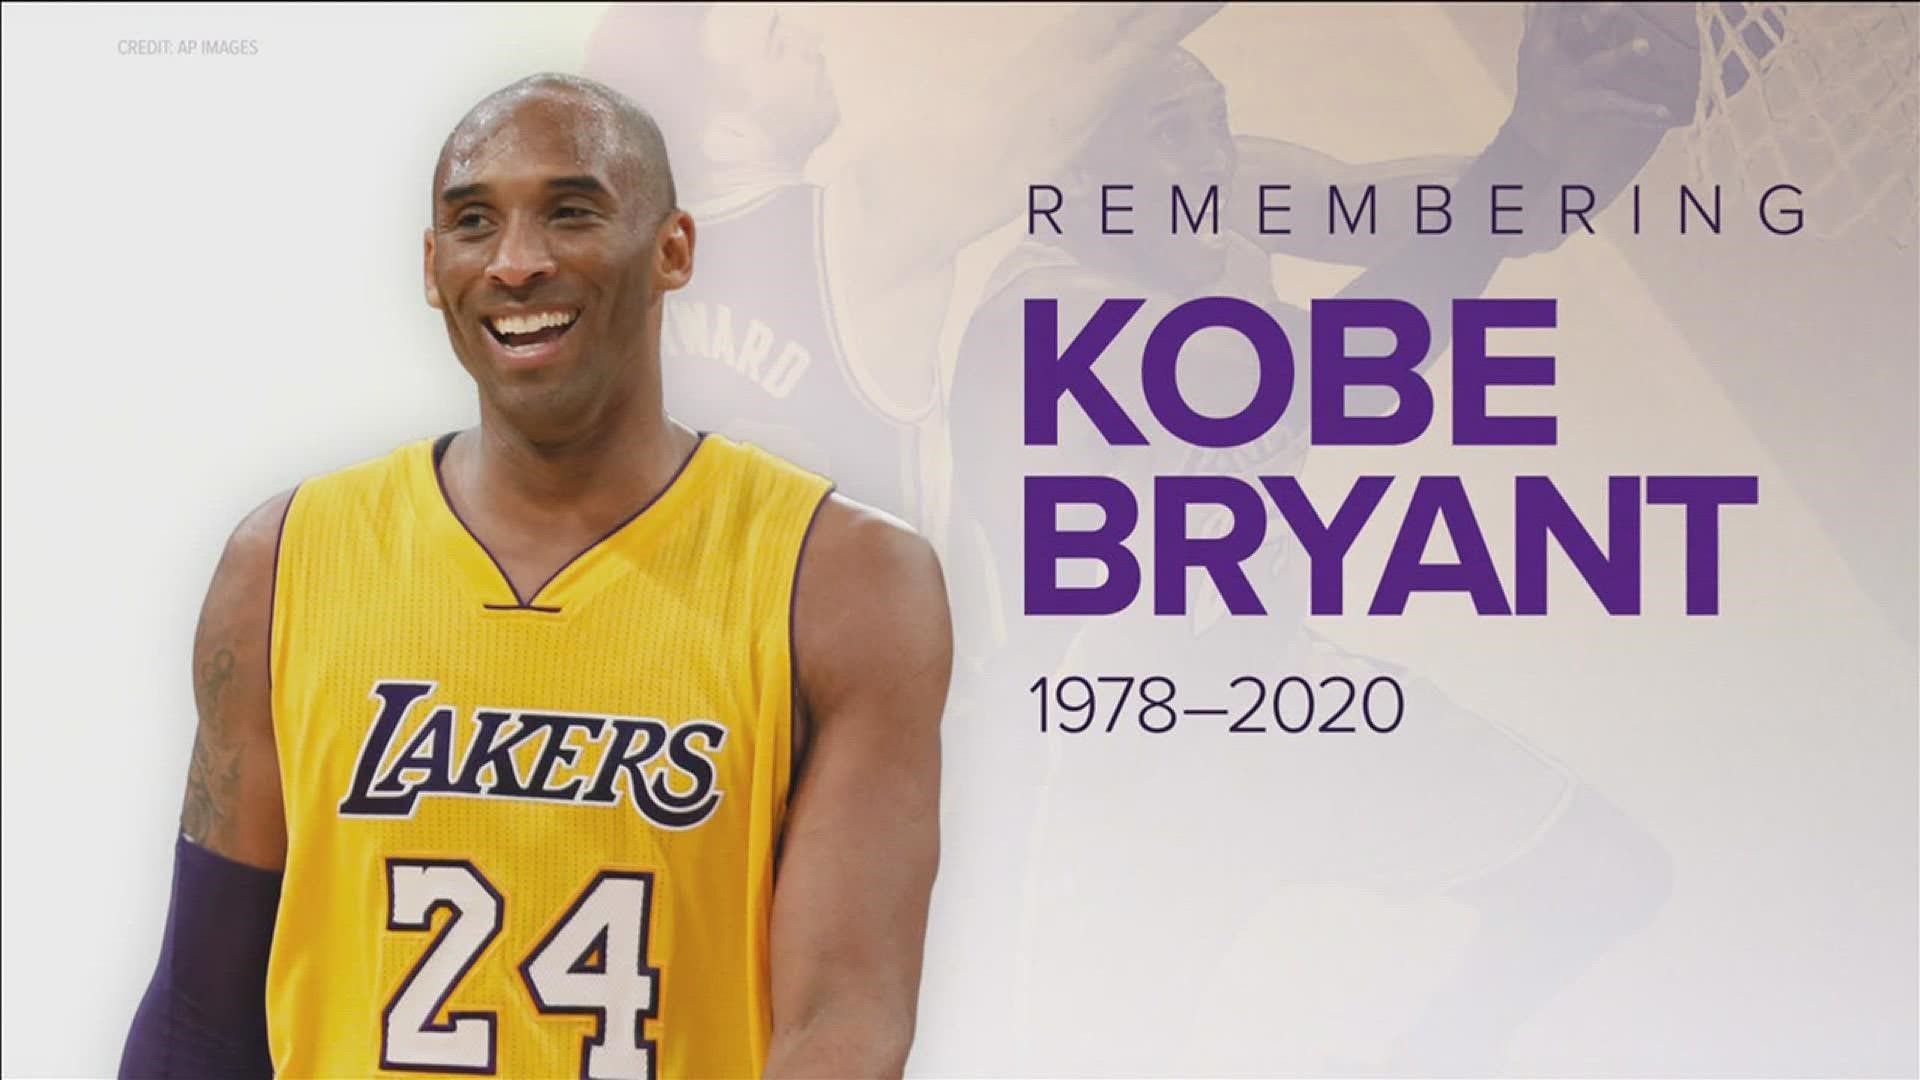 Wednesday marks two years since the NBA legend was killed in a helicopter crash